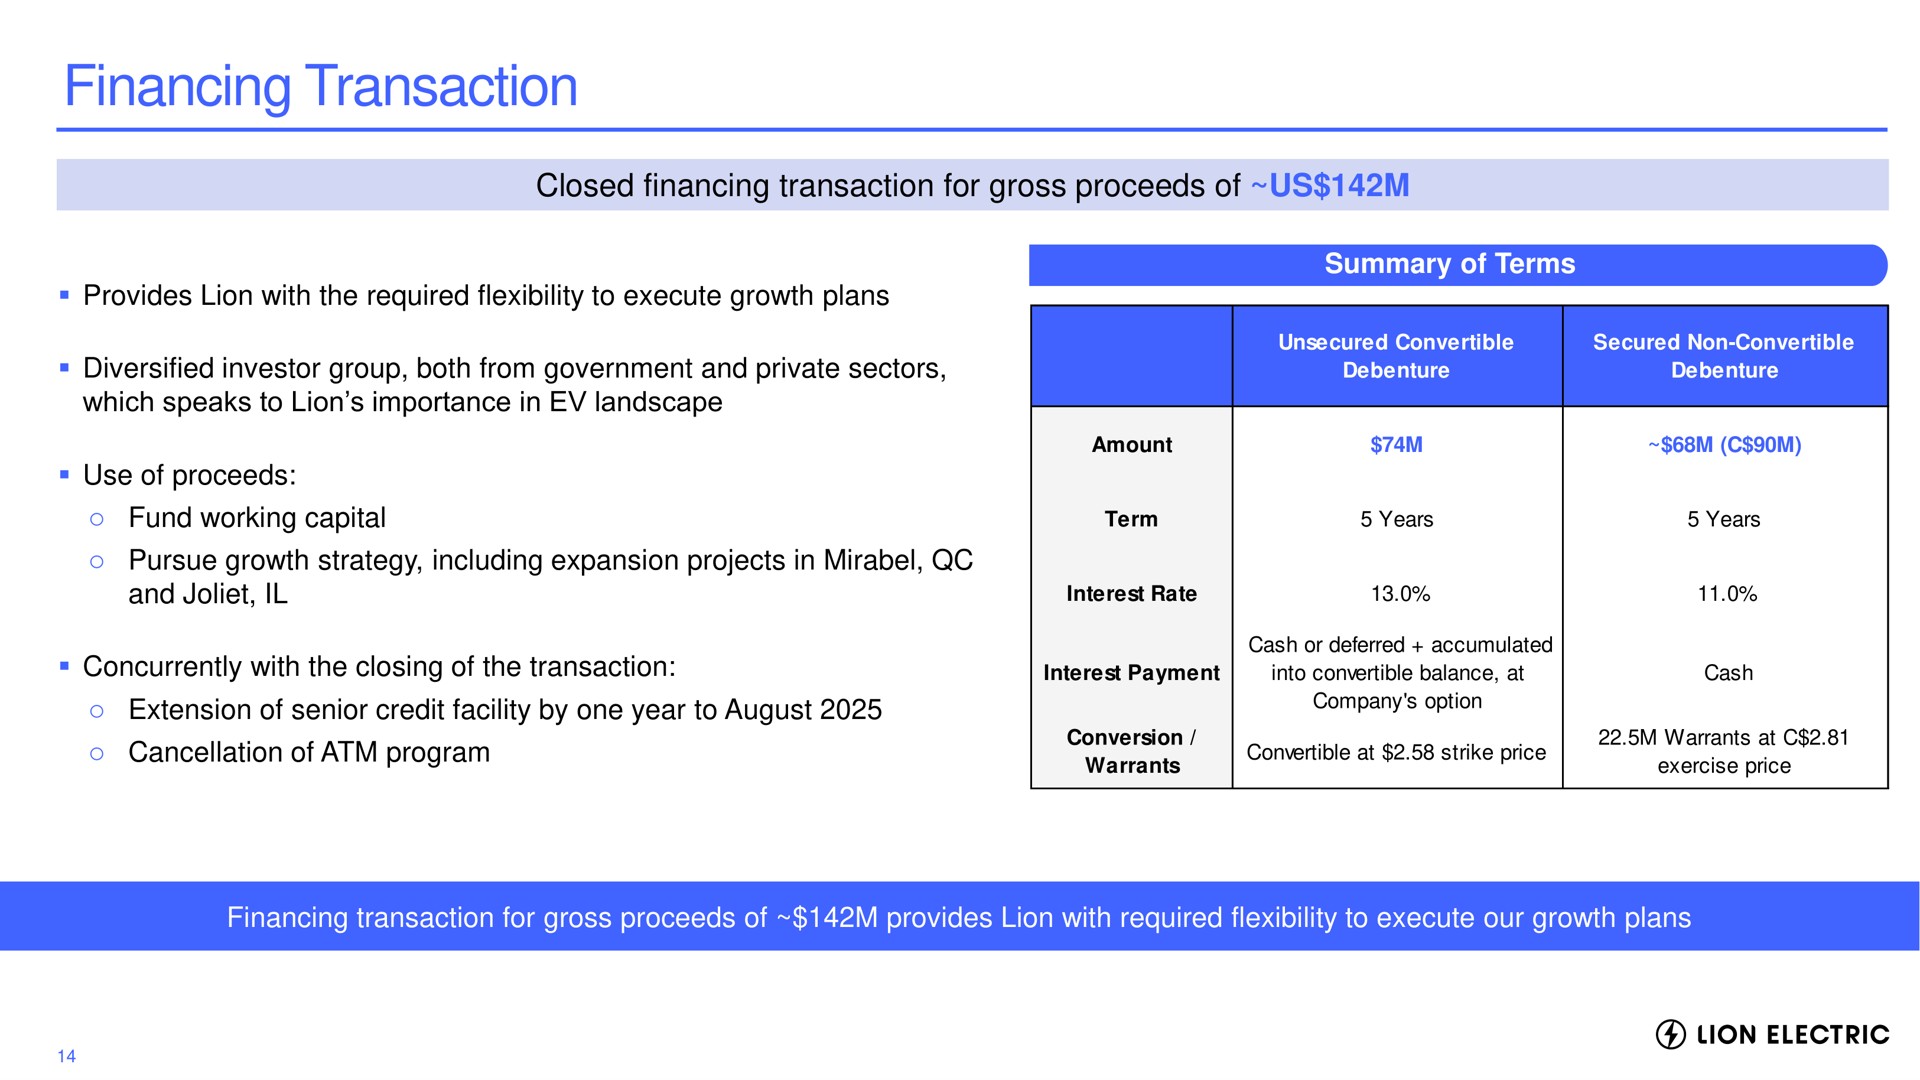 financing transaction closed financing transaction for gross proceeds of us summary of terms provides lion with the required flexibility to execute growth plans diversified investor group both from government and private sectors which speaks to lion importance in landscape use of proceeds fund working capital pursue growth strategy including expansion projects in and concurrently with the closing of the transaction extension of senior credit facility by one year to august cancellation of program financing transaction for gross proceeds of provides lion with required flexibility to execute our growth plans | Lion Electric